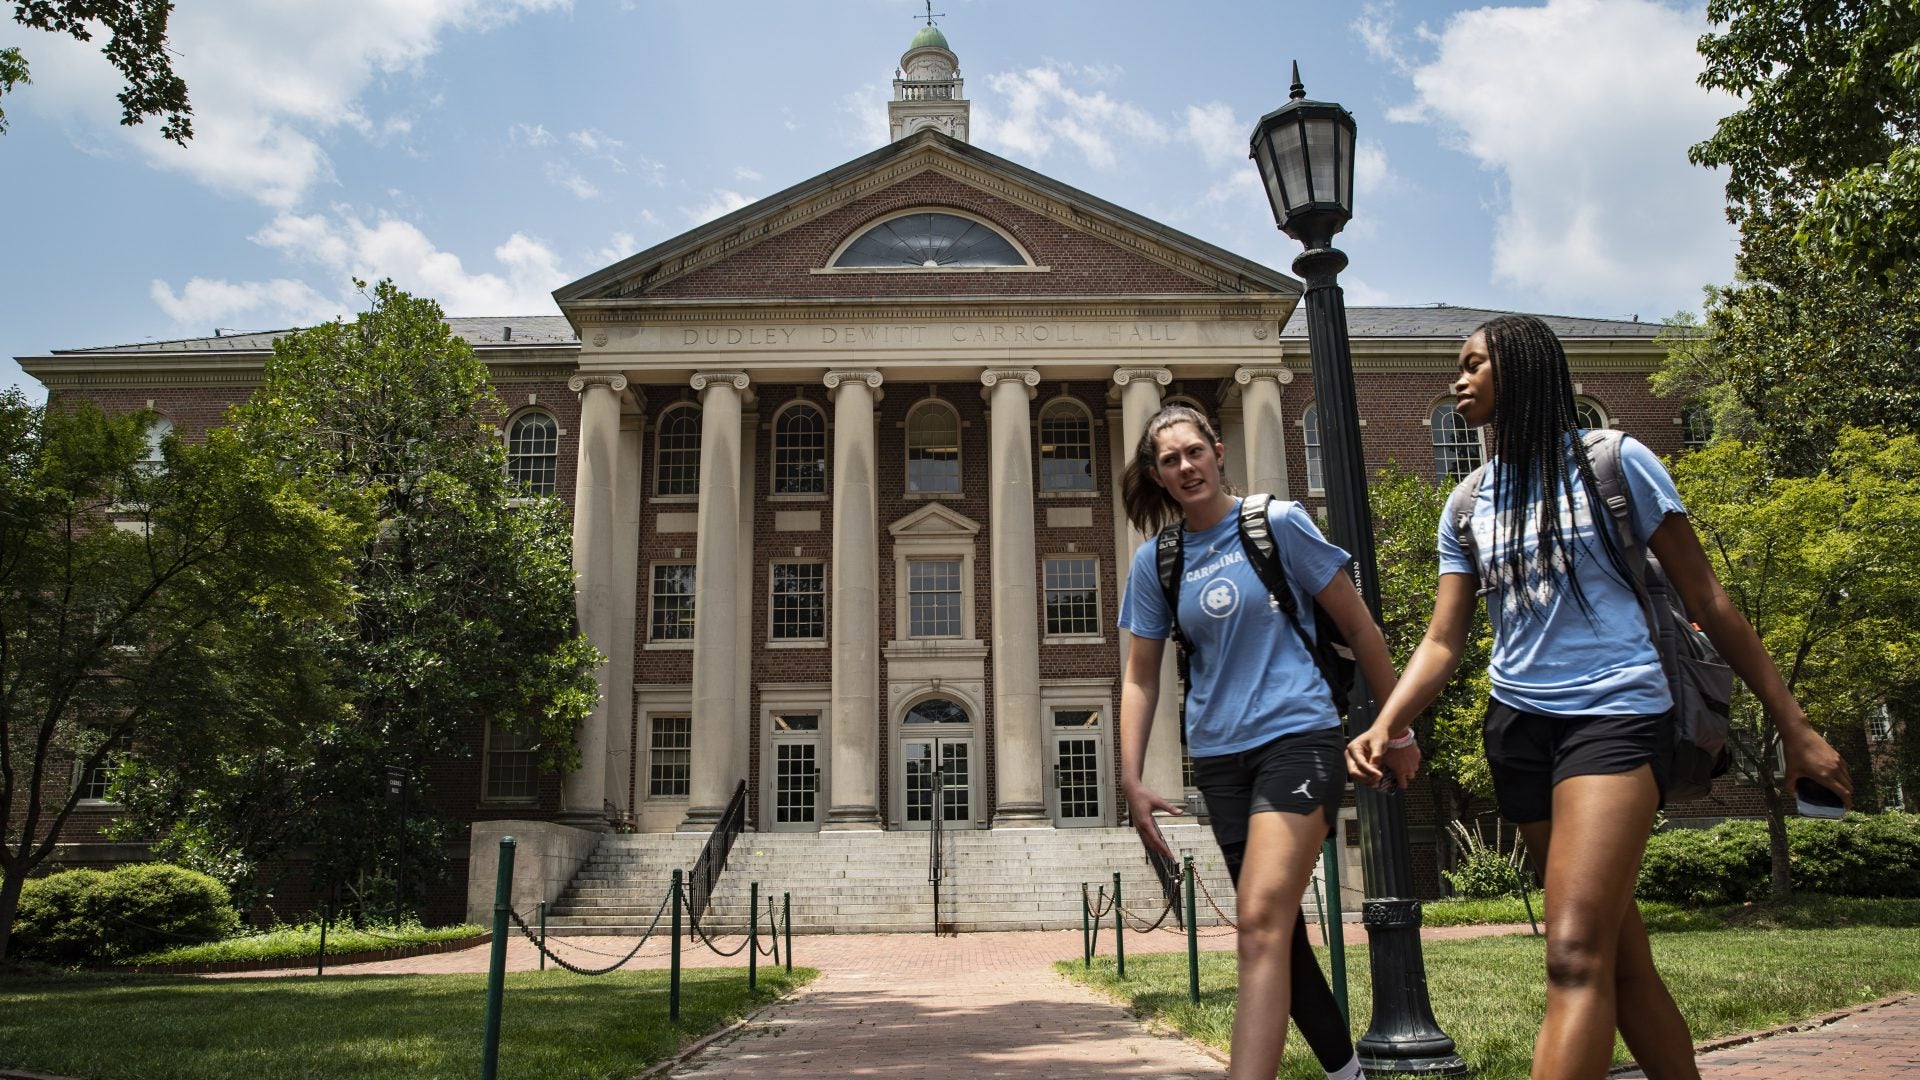 The DEI Decline Continues: UNC Chapel Hill Board Votes To Cut Funding For Diversity Programs